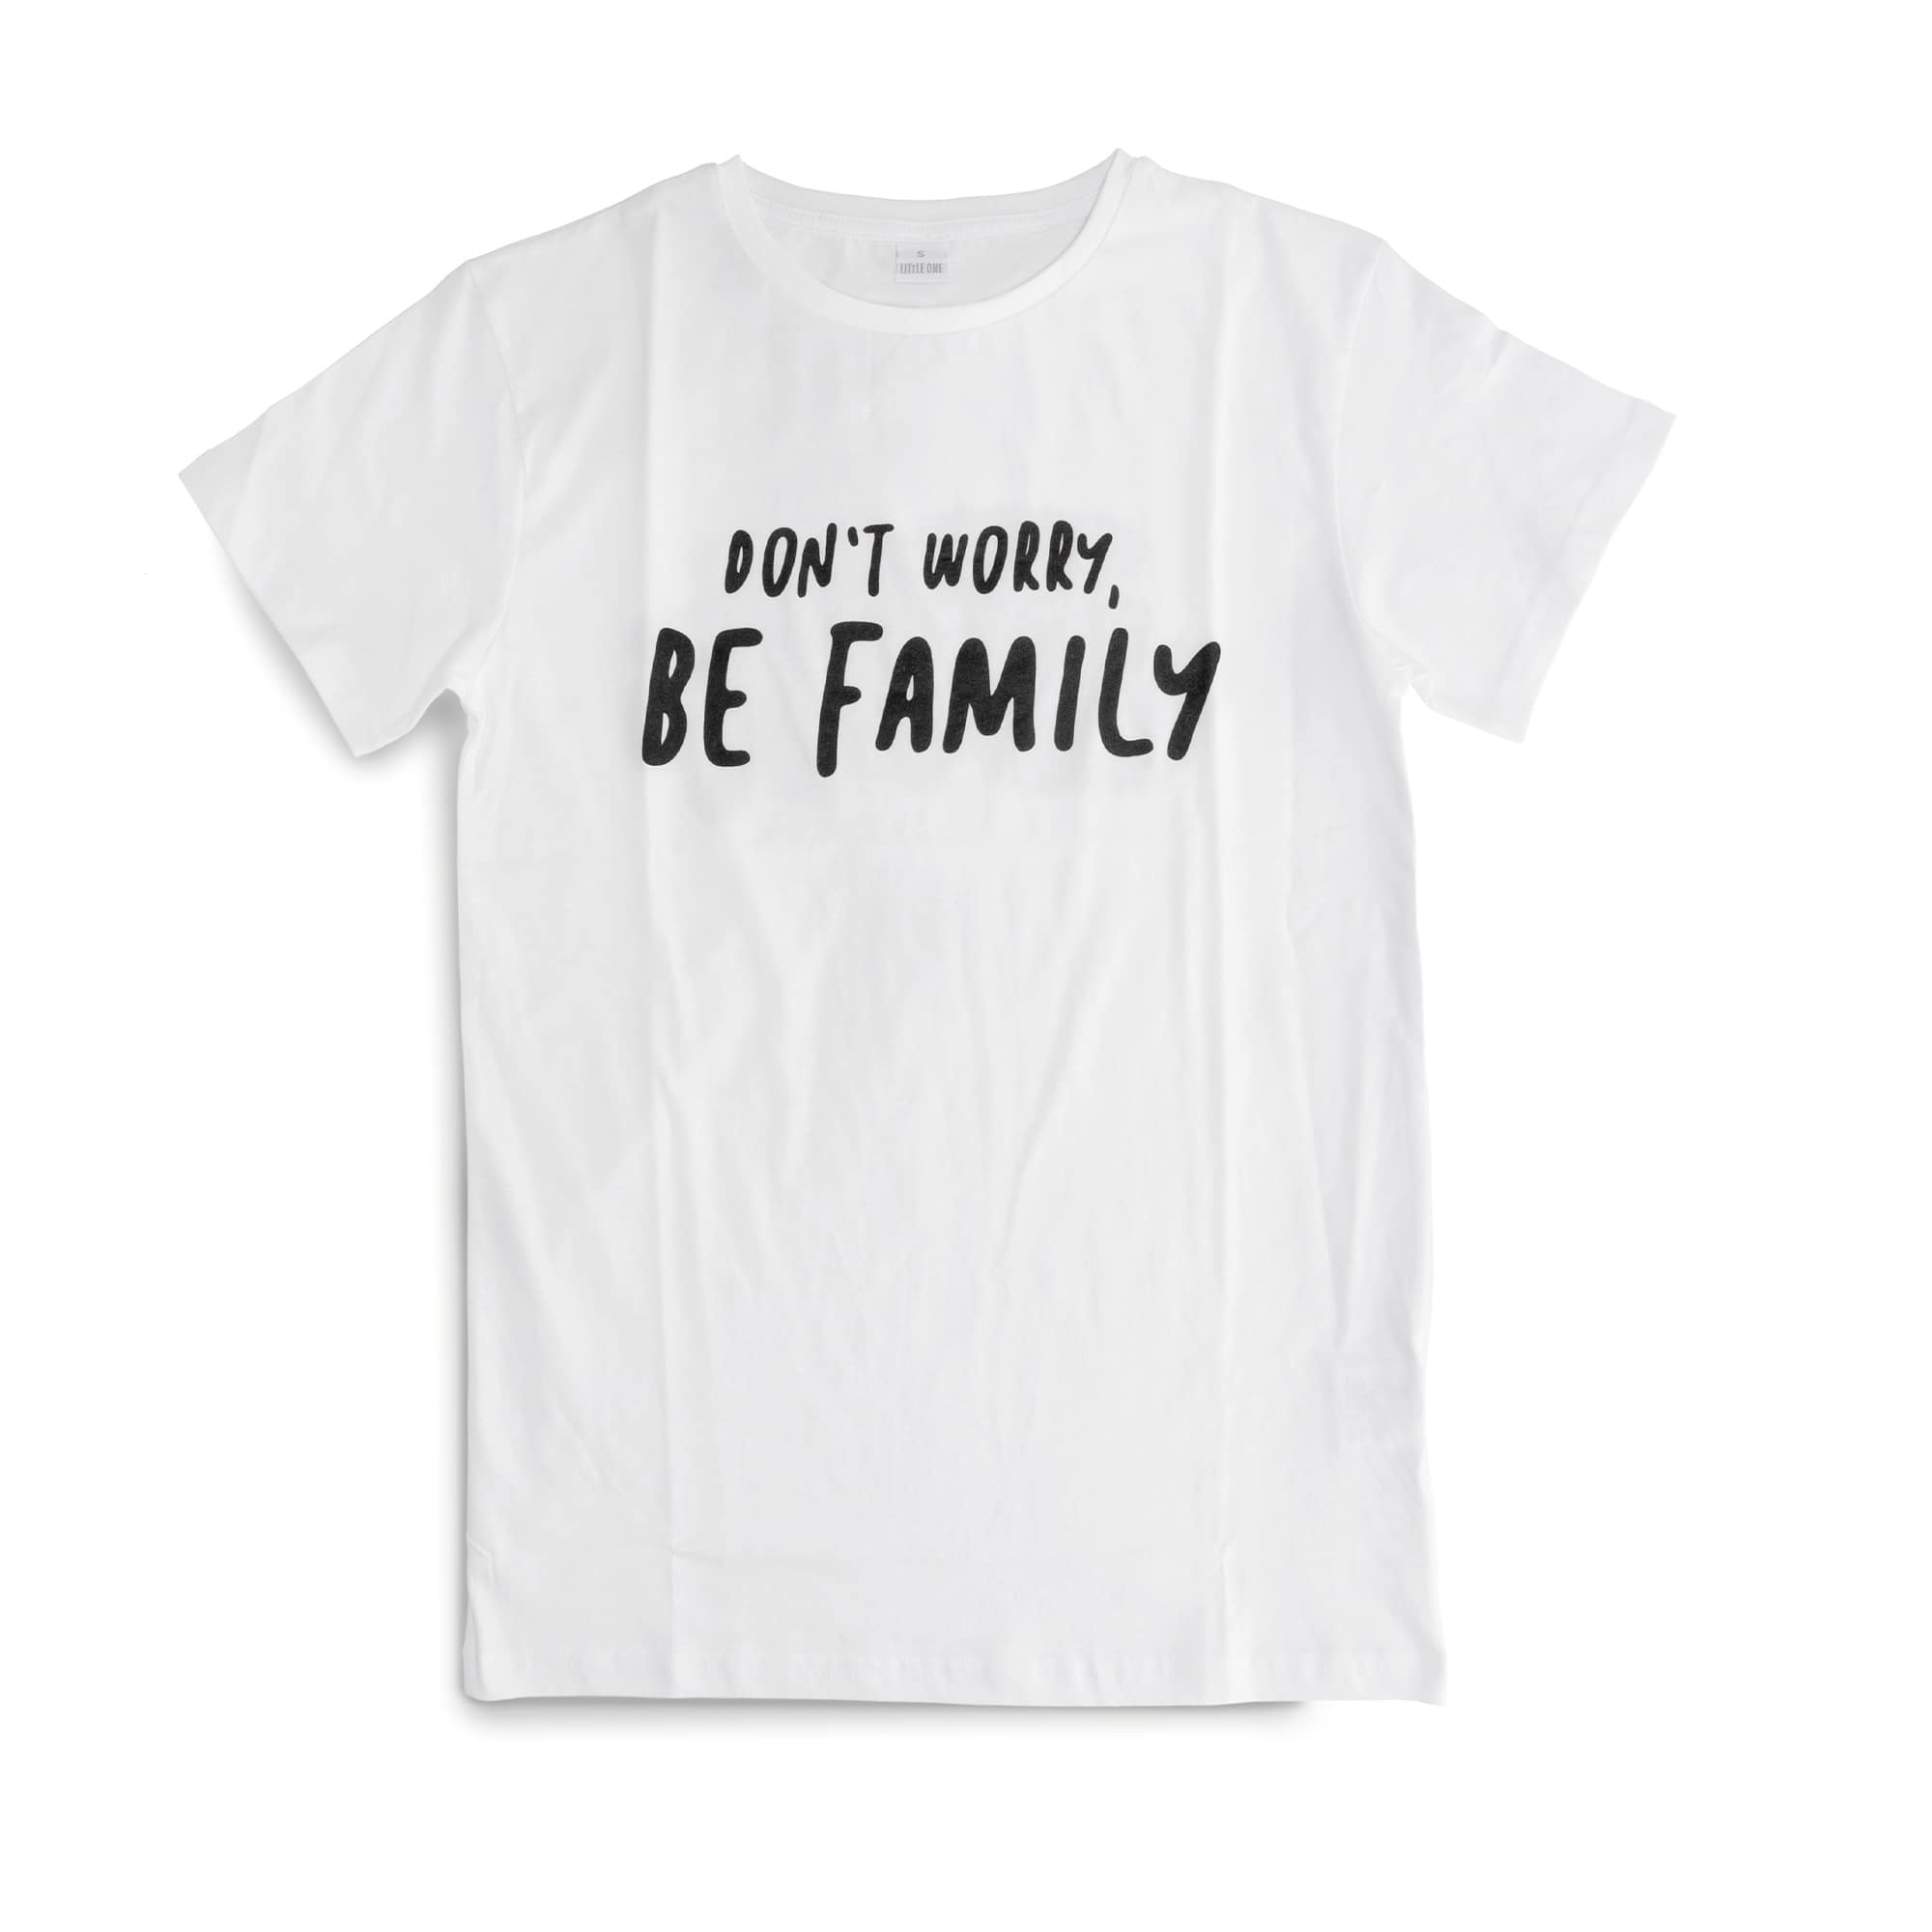 T-Shirt "Don't worry, be family" LITTLE ONE Weiß M2000584432905 1